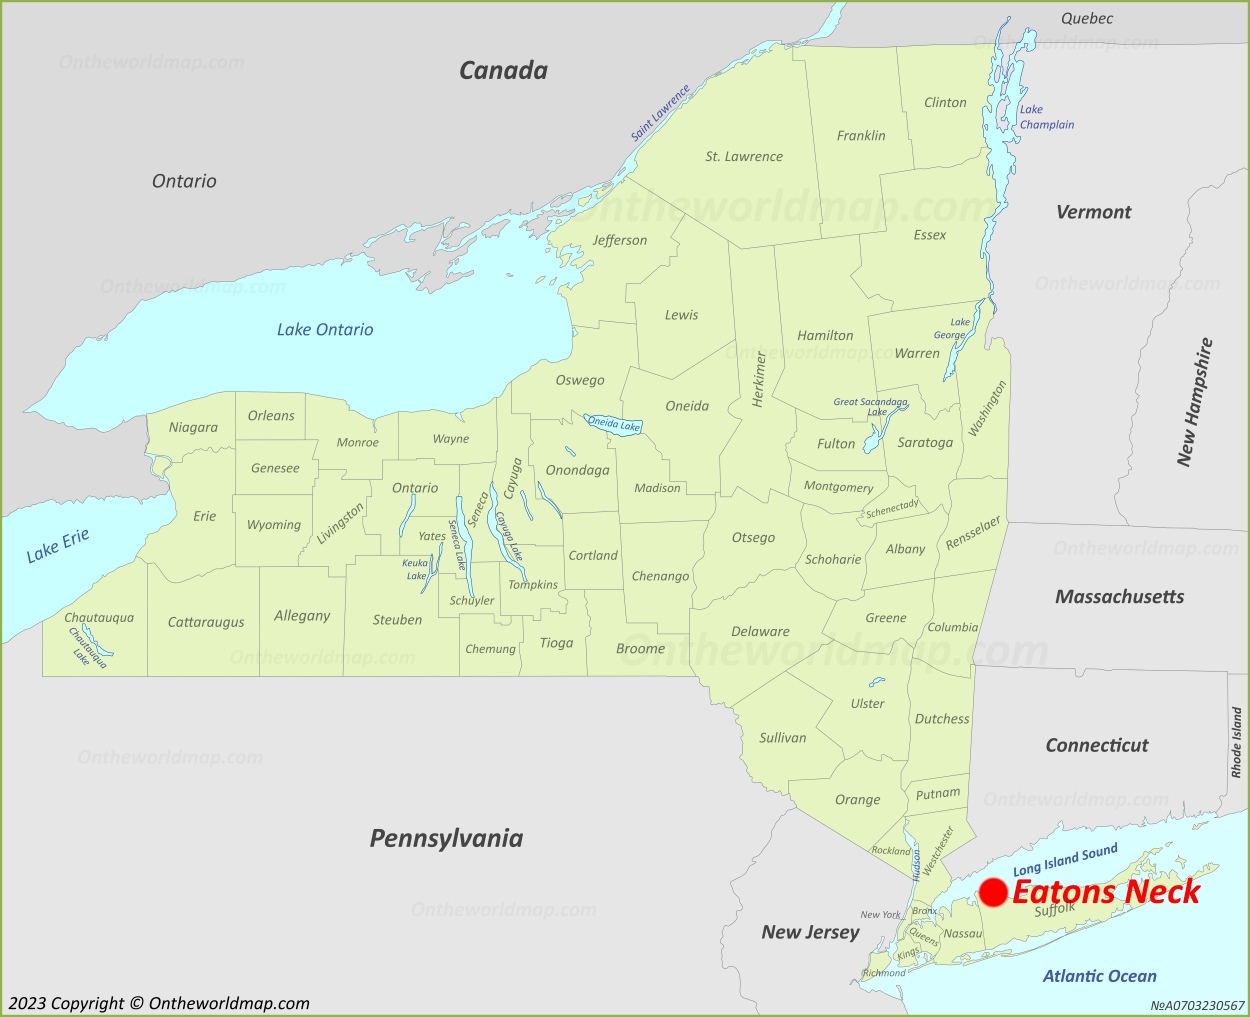 Eatons Neck Location On The New York State Map